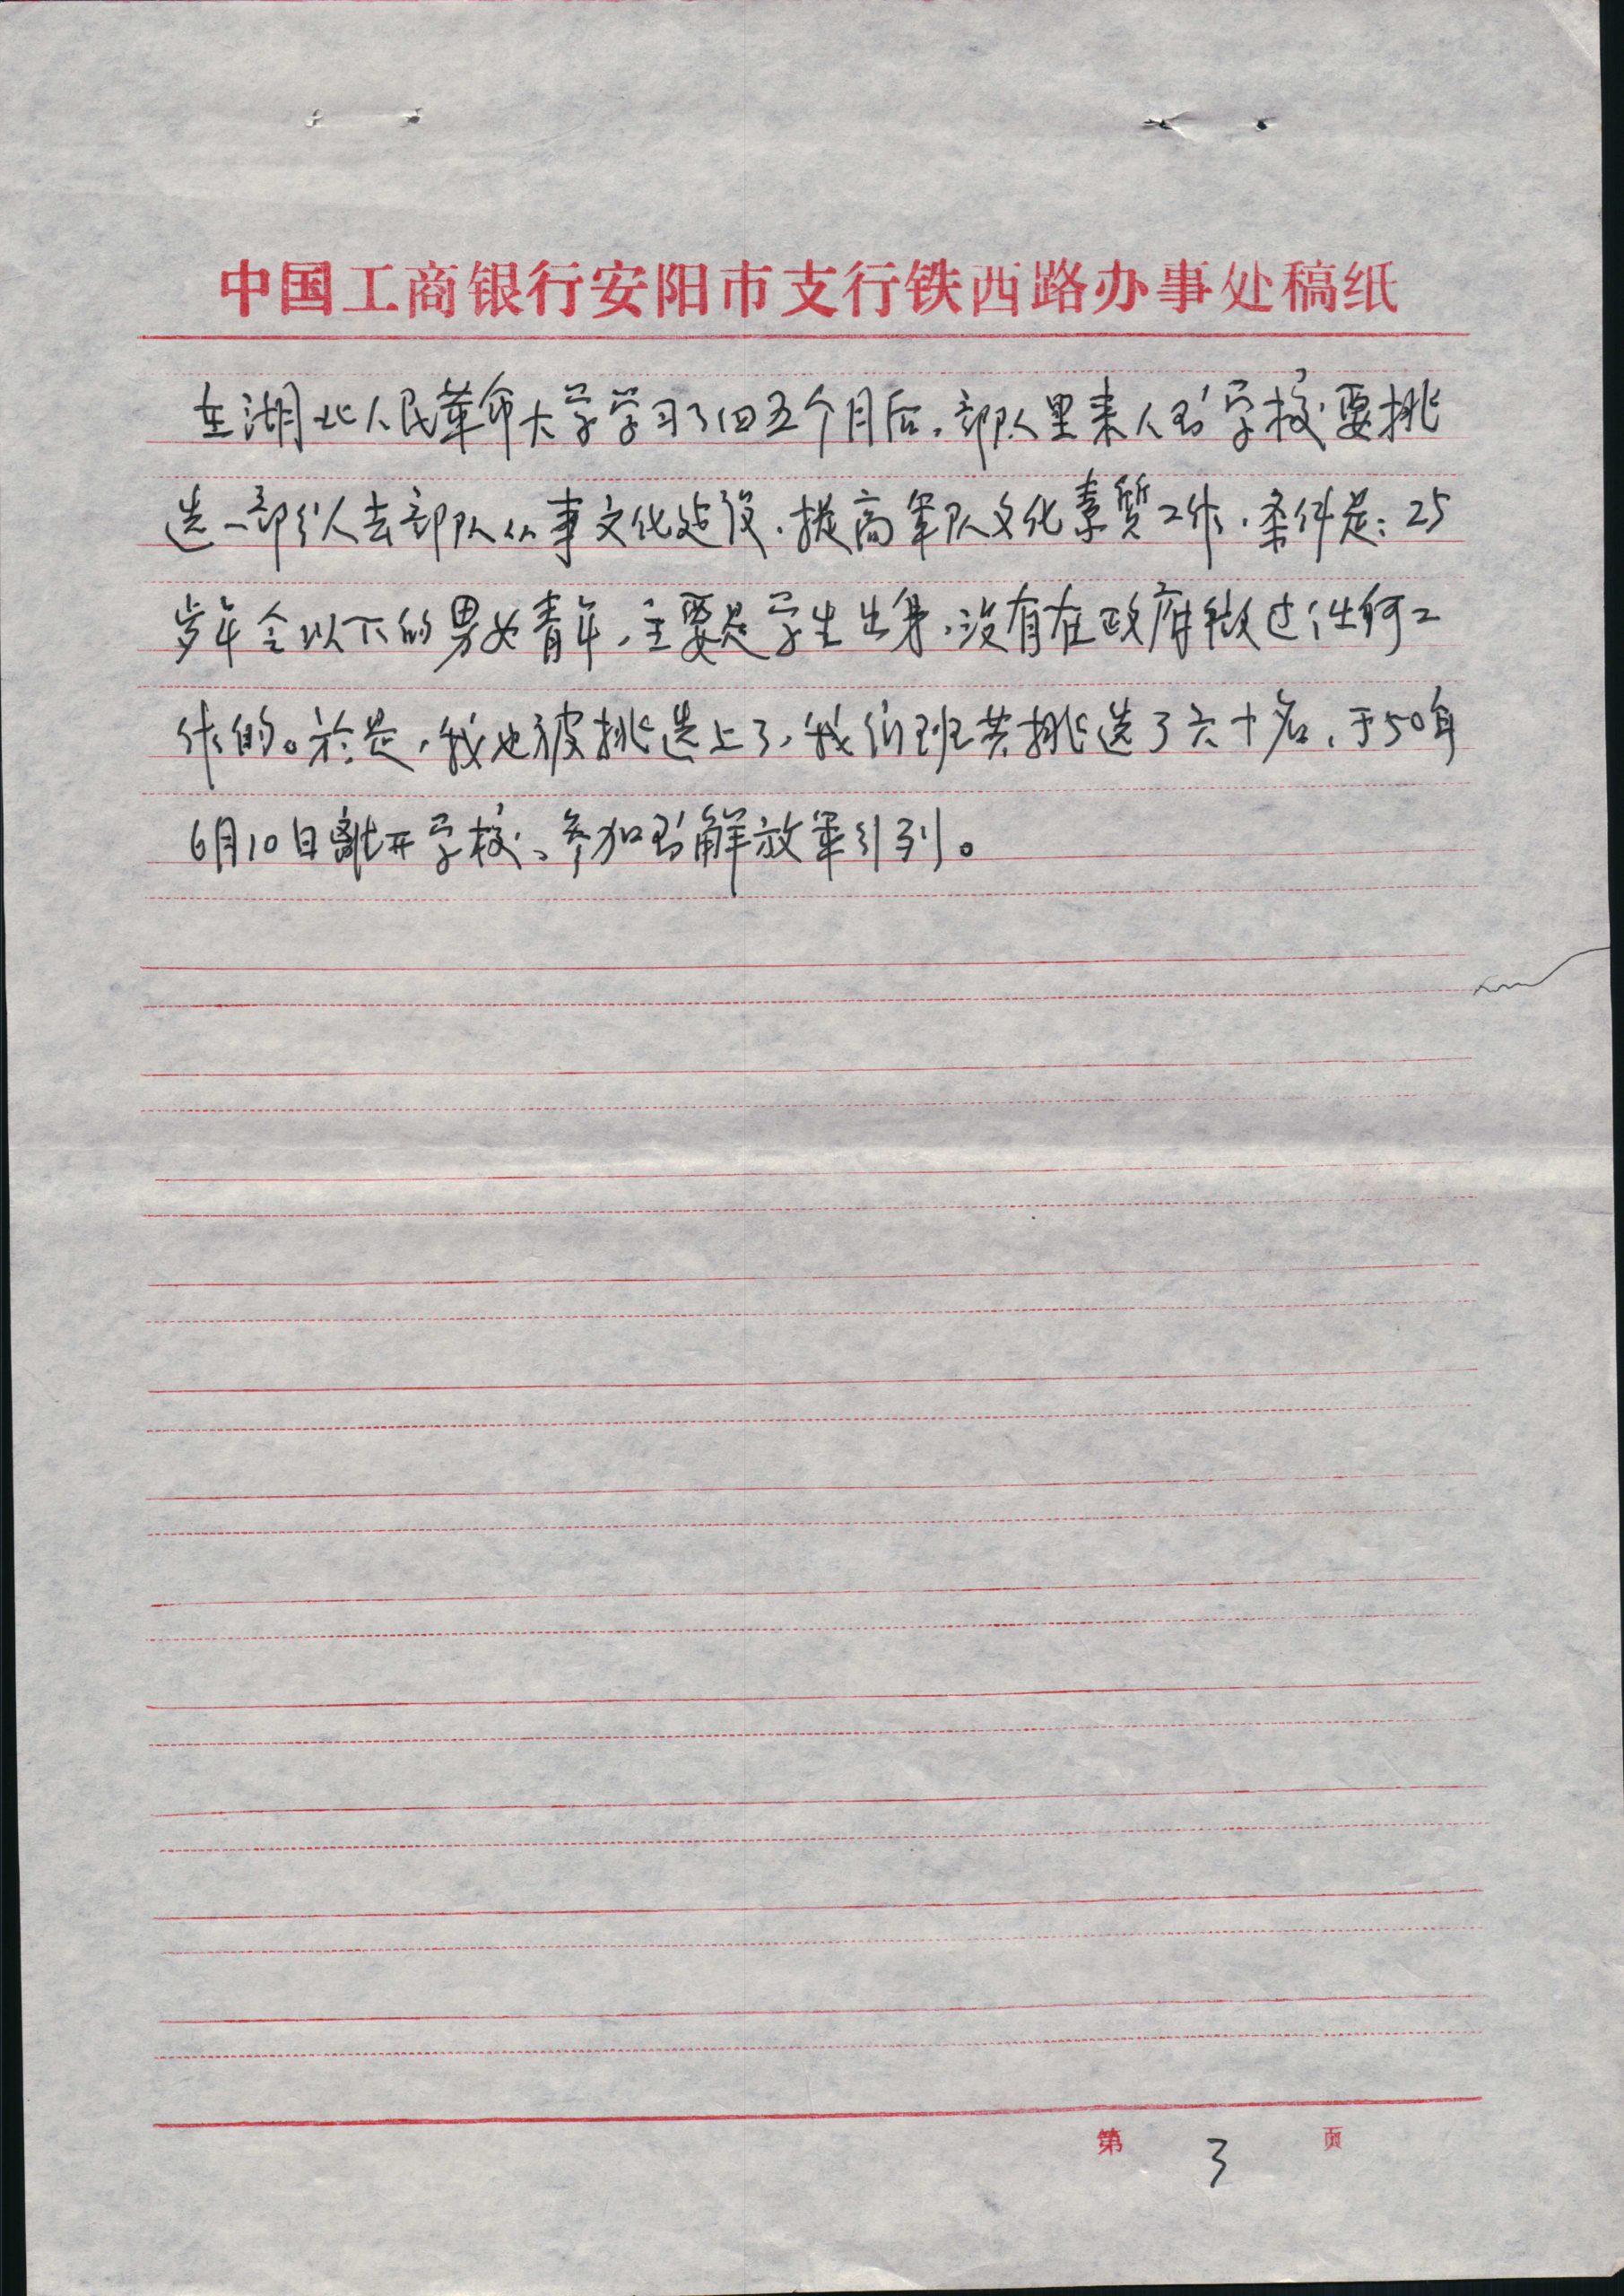 The third page of the written history of Yang Kwang Tan, who took part in the Korean War as part of the Chinese Army. Tan's niece listened to one of Dr. Han's seminars on the Korean Peninsula and thus asked her father to write about Tan's service. 